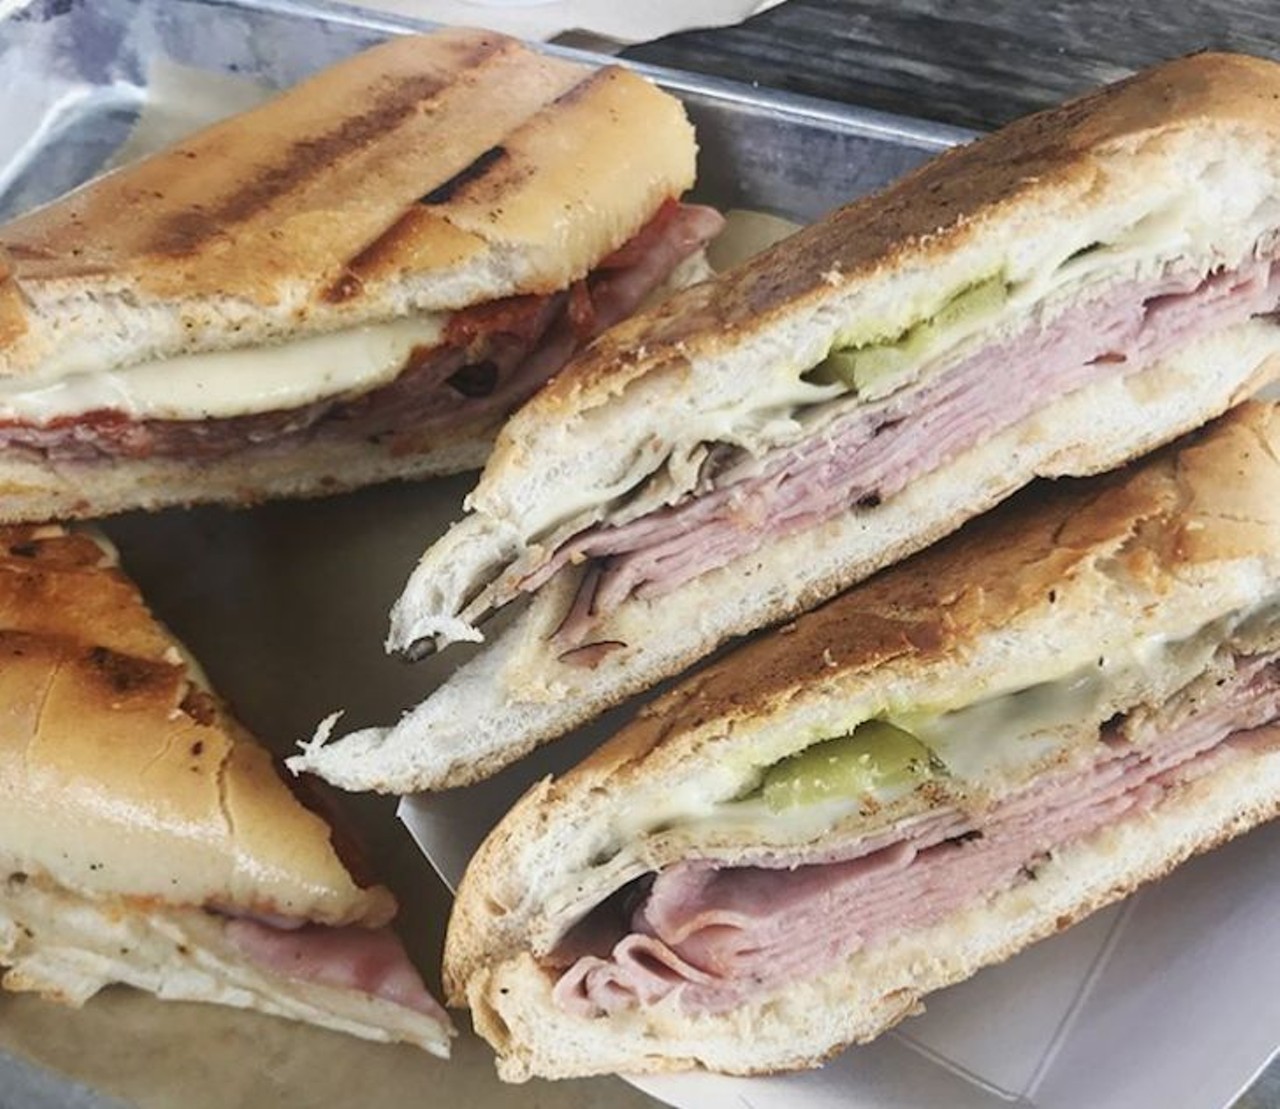 A Cuban from Black Bean Deli 
multiple locations 
Cuban sandwiches are perfectly crafted at Black Bean Deli locations. Stop in before 3 p.m. to get the special that offers rice and black beans along with the sandwich. 
Photo via cait_chamberss/Instagram